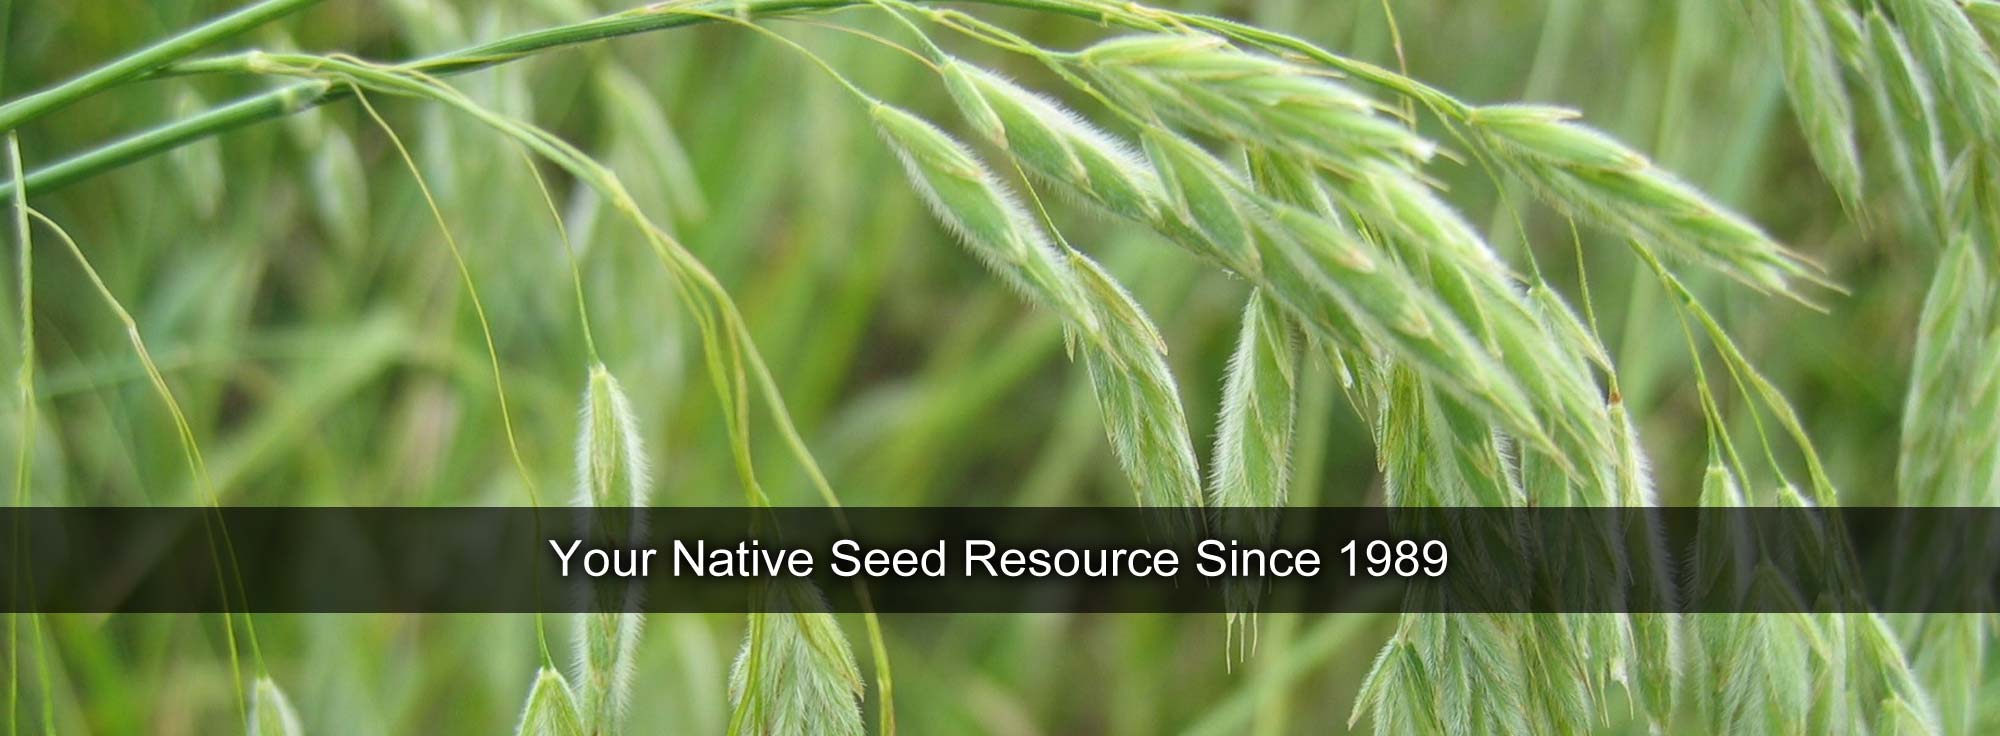 Your Native Seed Resource Since 1989